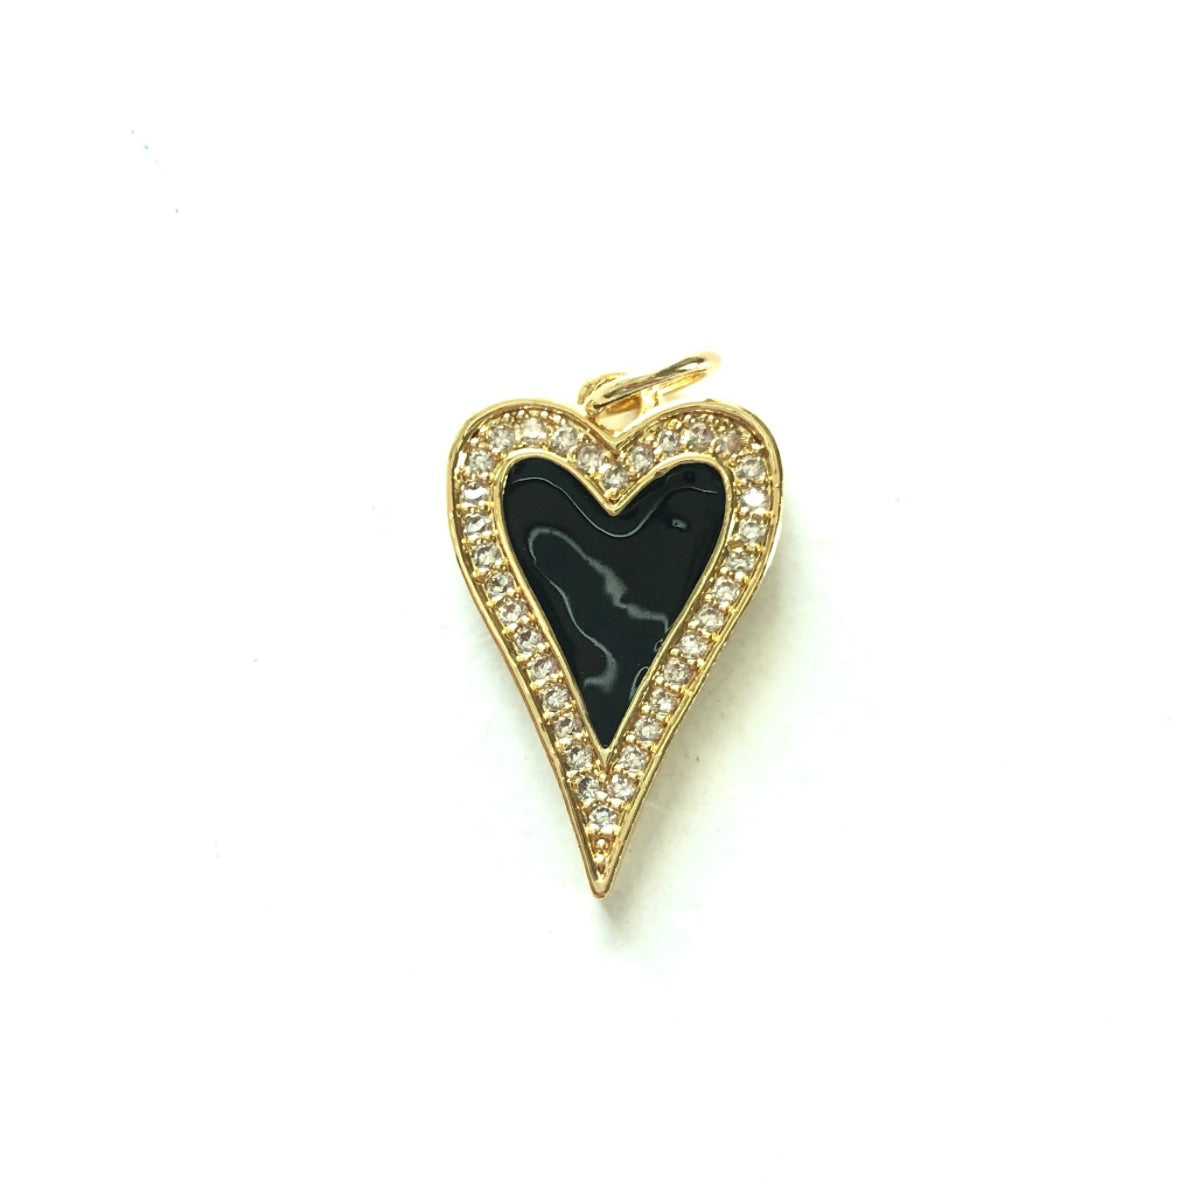 10pcs/lot 23.4*14.6mm Red, Pink, White, Black, Fuchsia Enamel CZ Pave Heart Charms-Gold Black CZ Paved Charms Hearts New Charms Arrivals Charms Beads Beyond